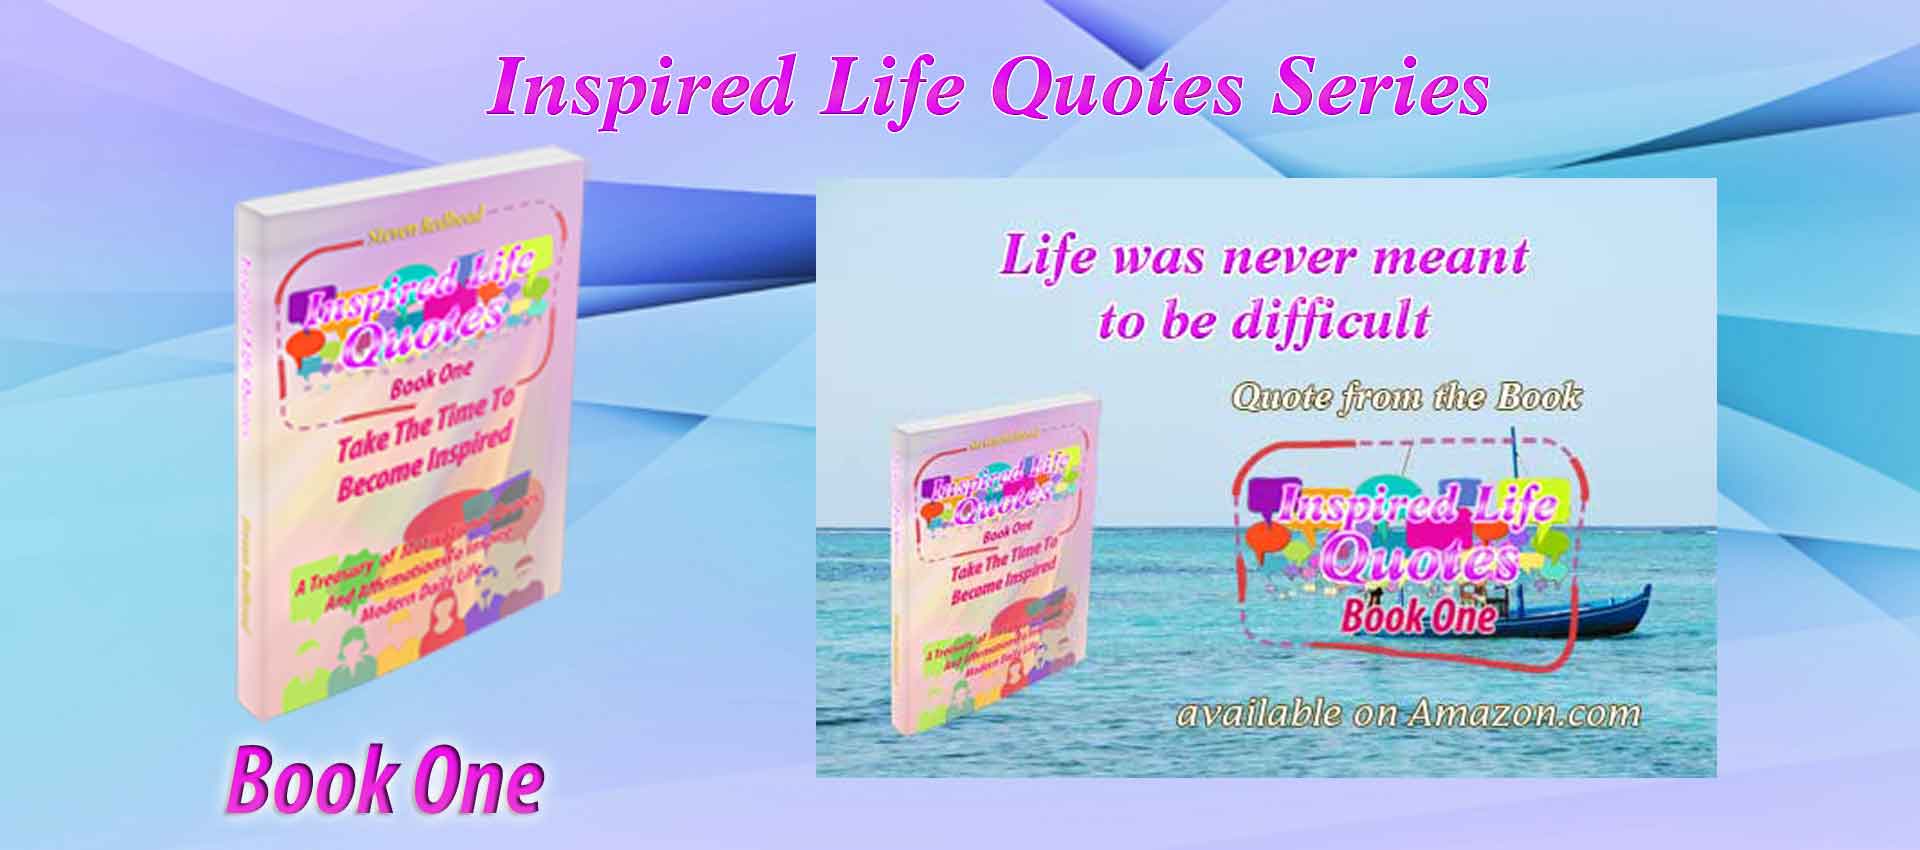 inspired life quotes book1 steven redhead